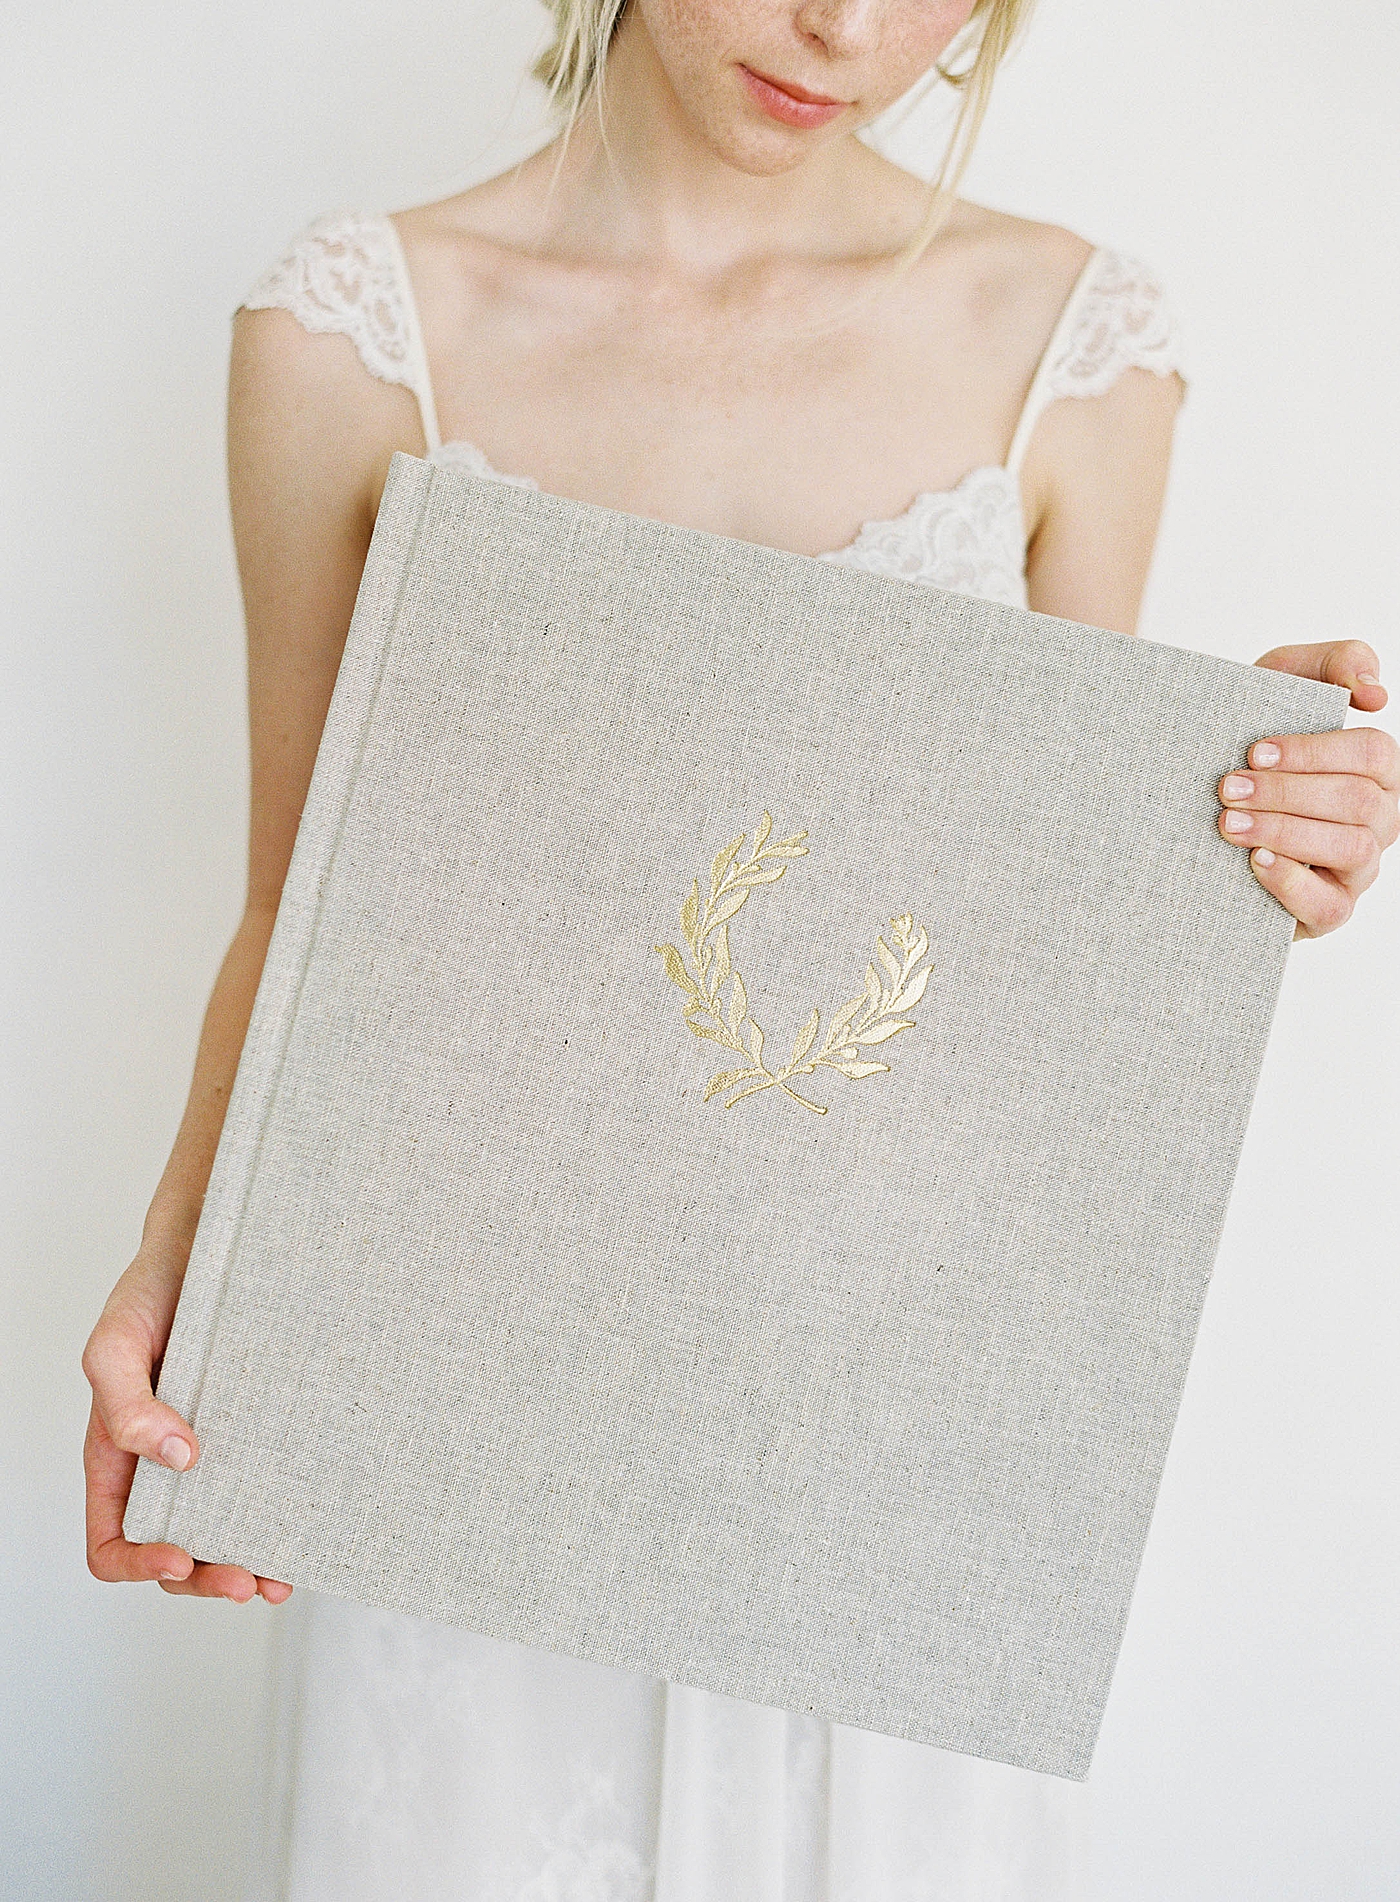 Light gray wedding album with gold details held by woman in white dress | Images Diane Sotero 